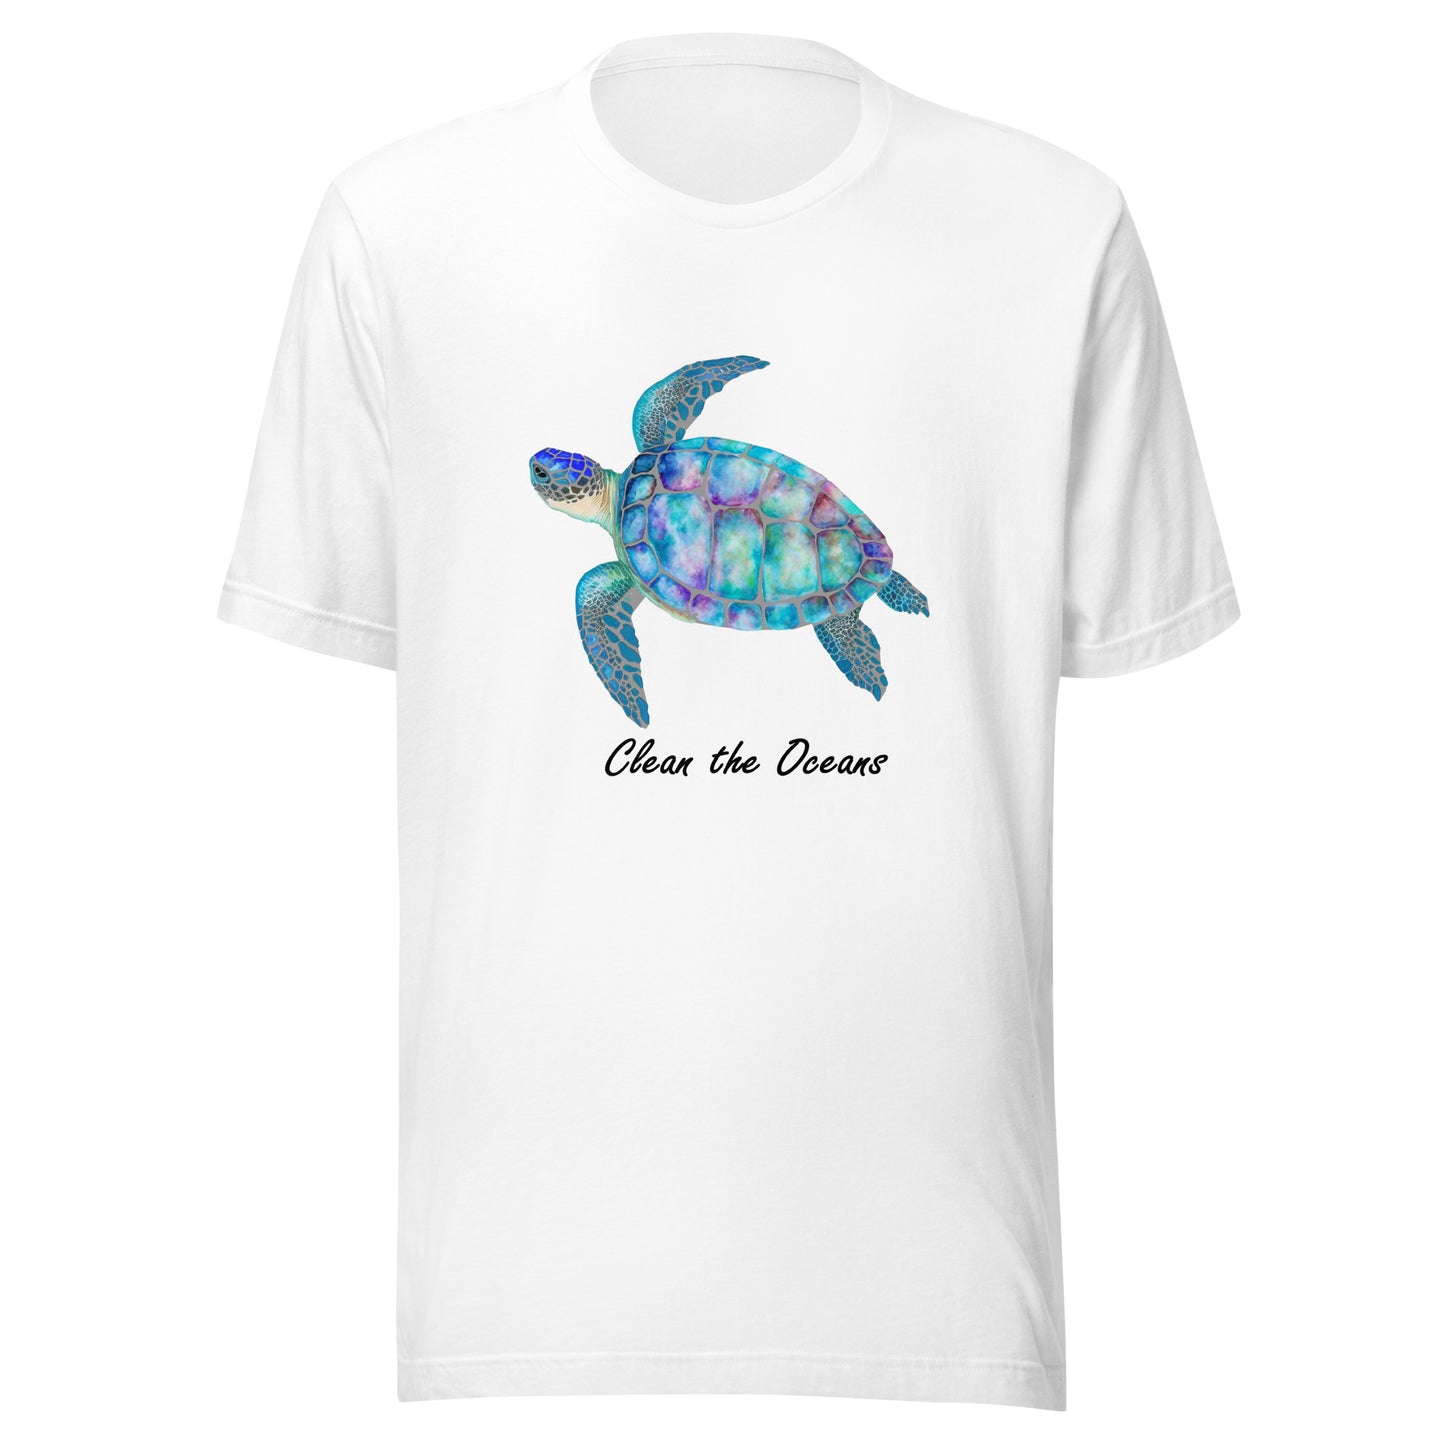 Women and Men's (Unisex) T-Shirt Printed with a Turtle labeled "Protect the Oceans"